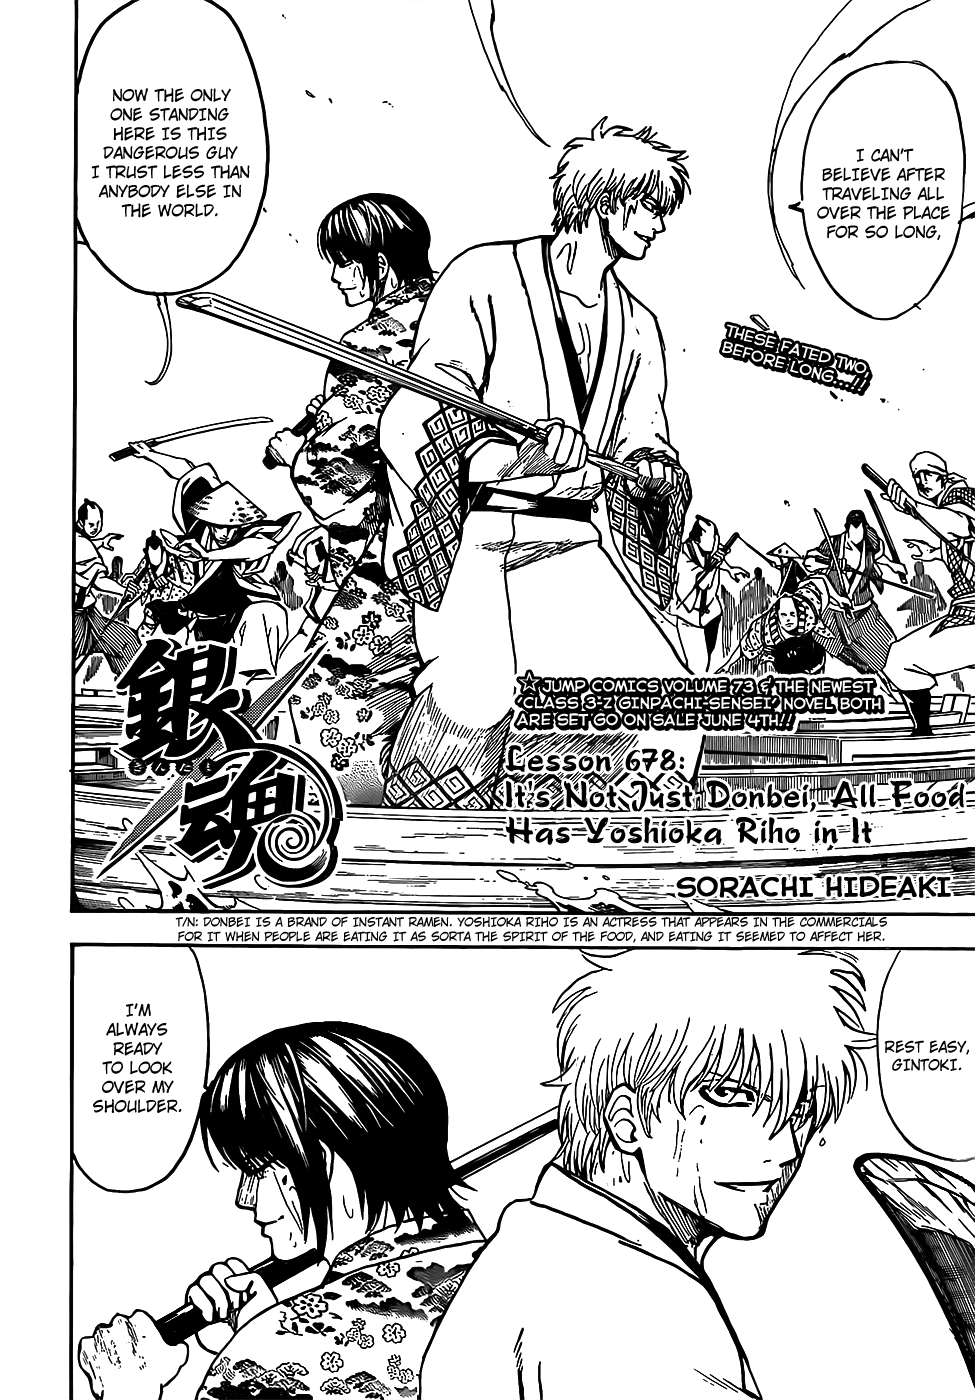 Gintama chapter 678 page 3